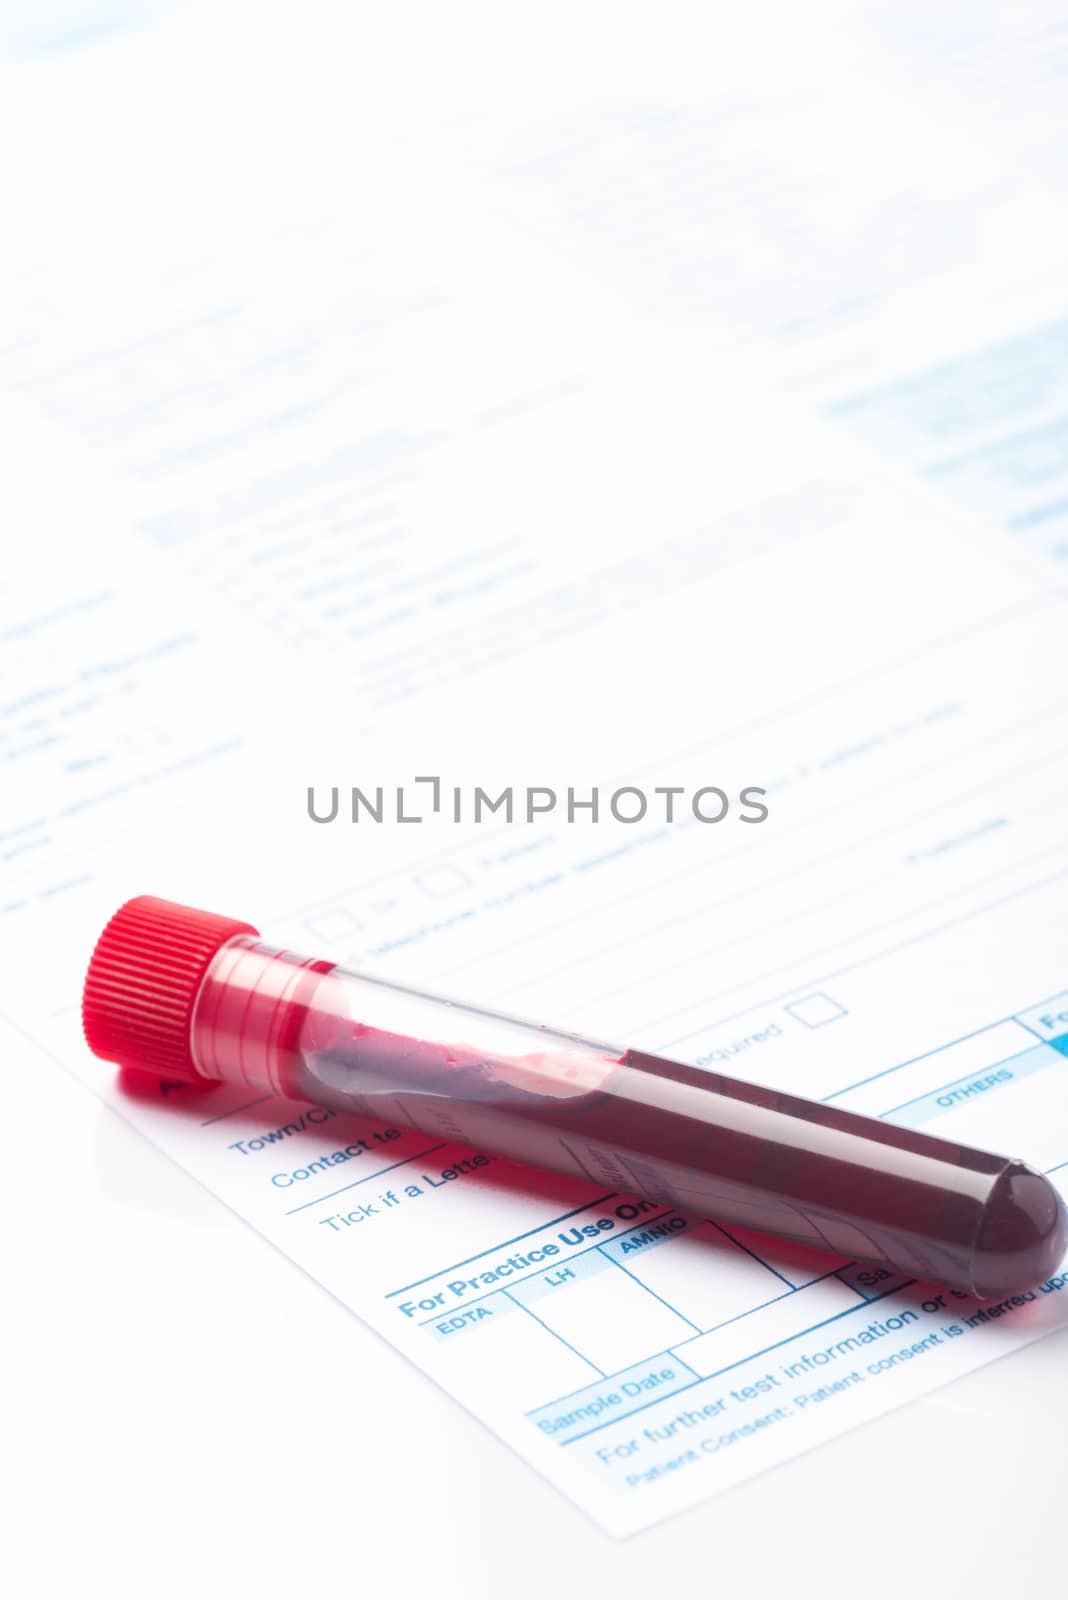 Blood Test Samples for Presence of Coronavirus (COVID-19) Tube Containing a Blood Sample from Patient.